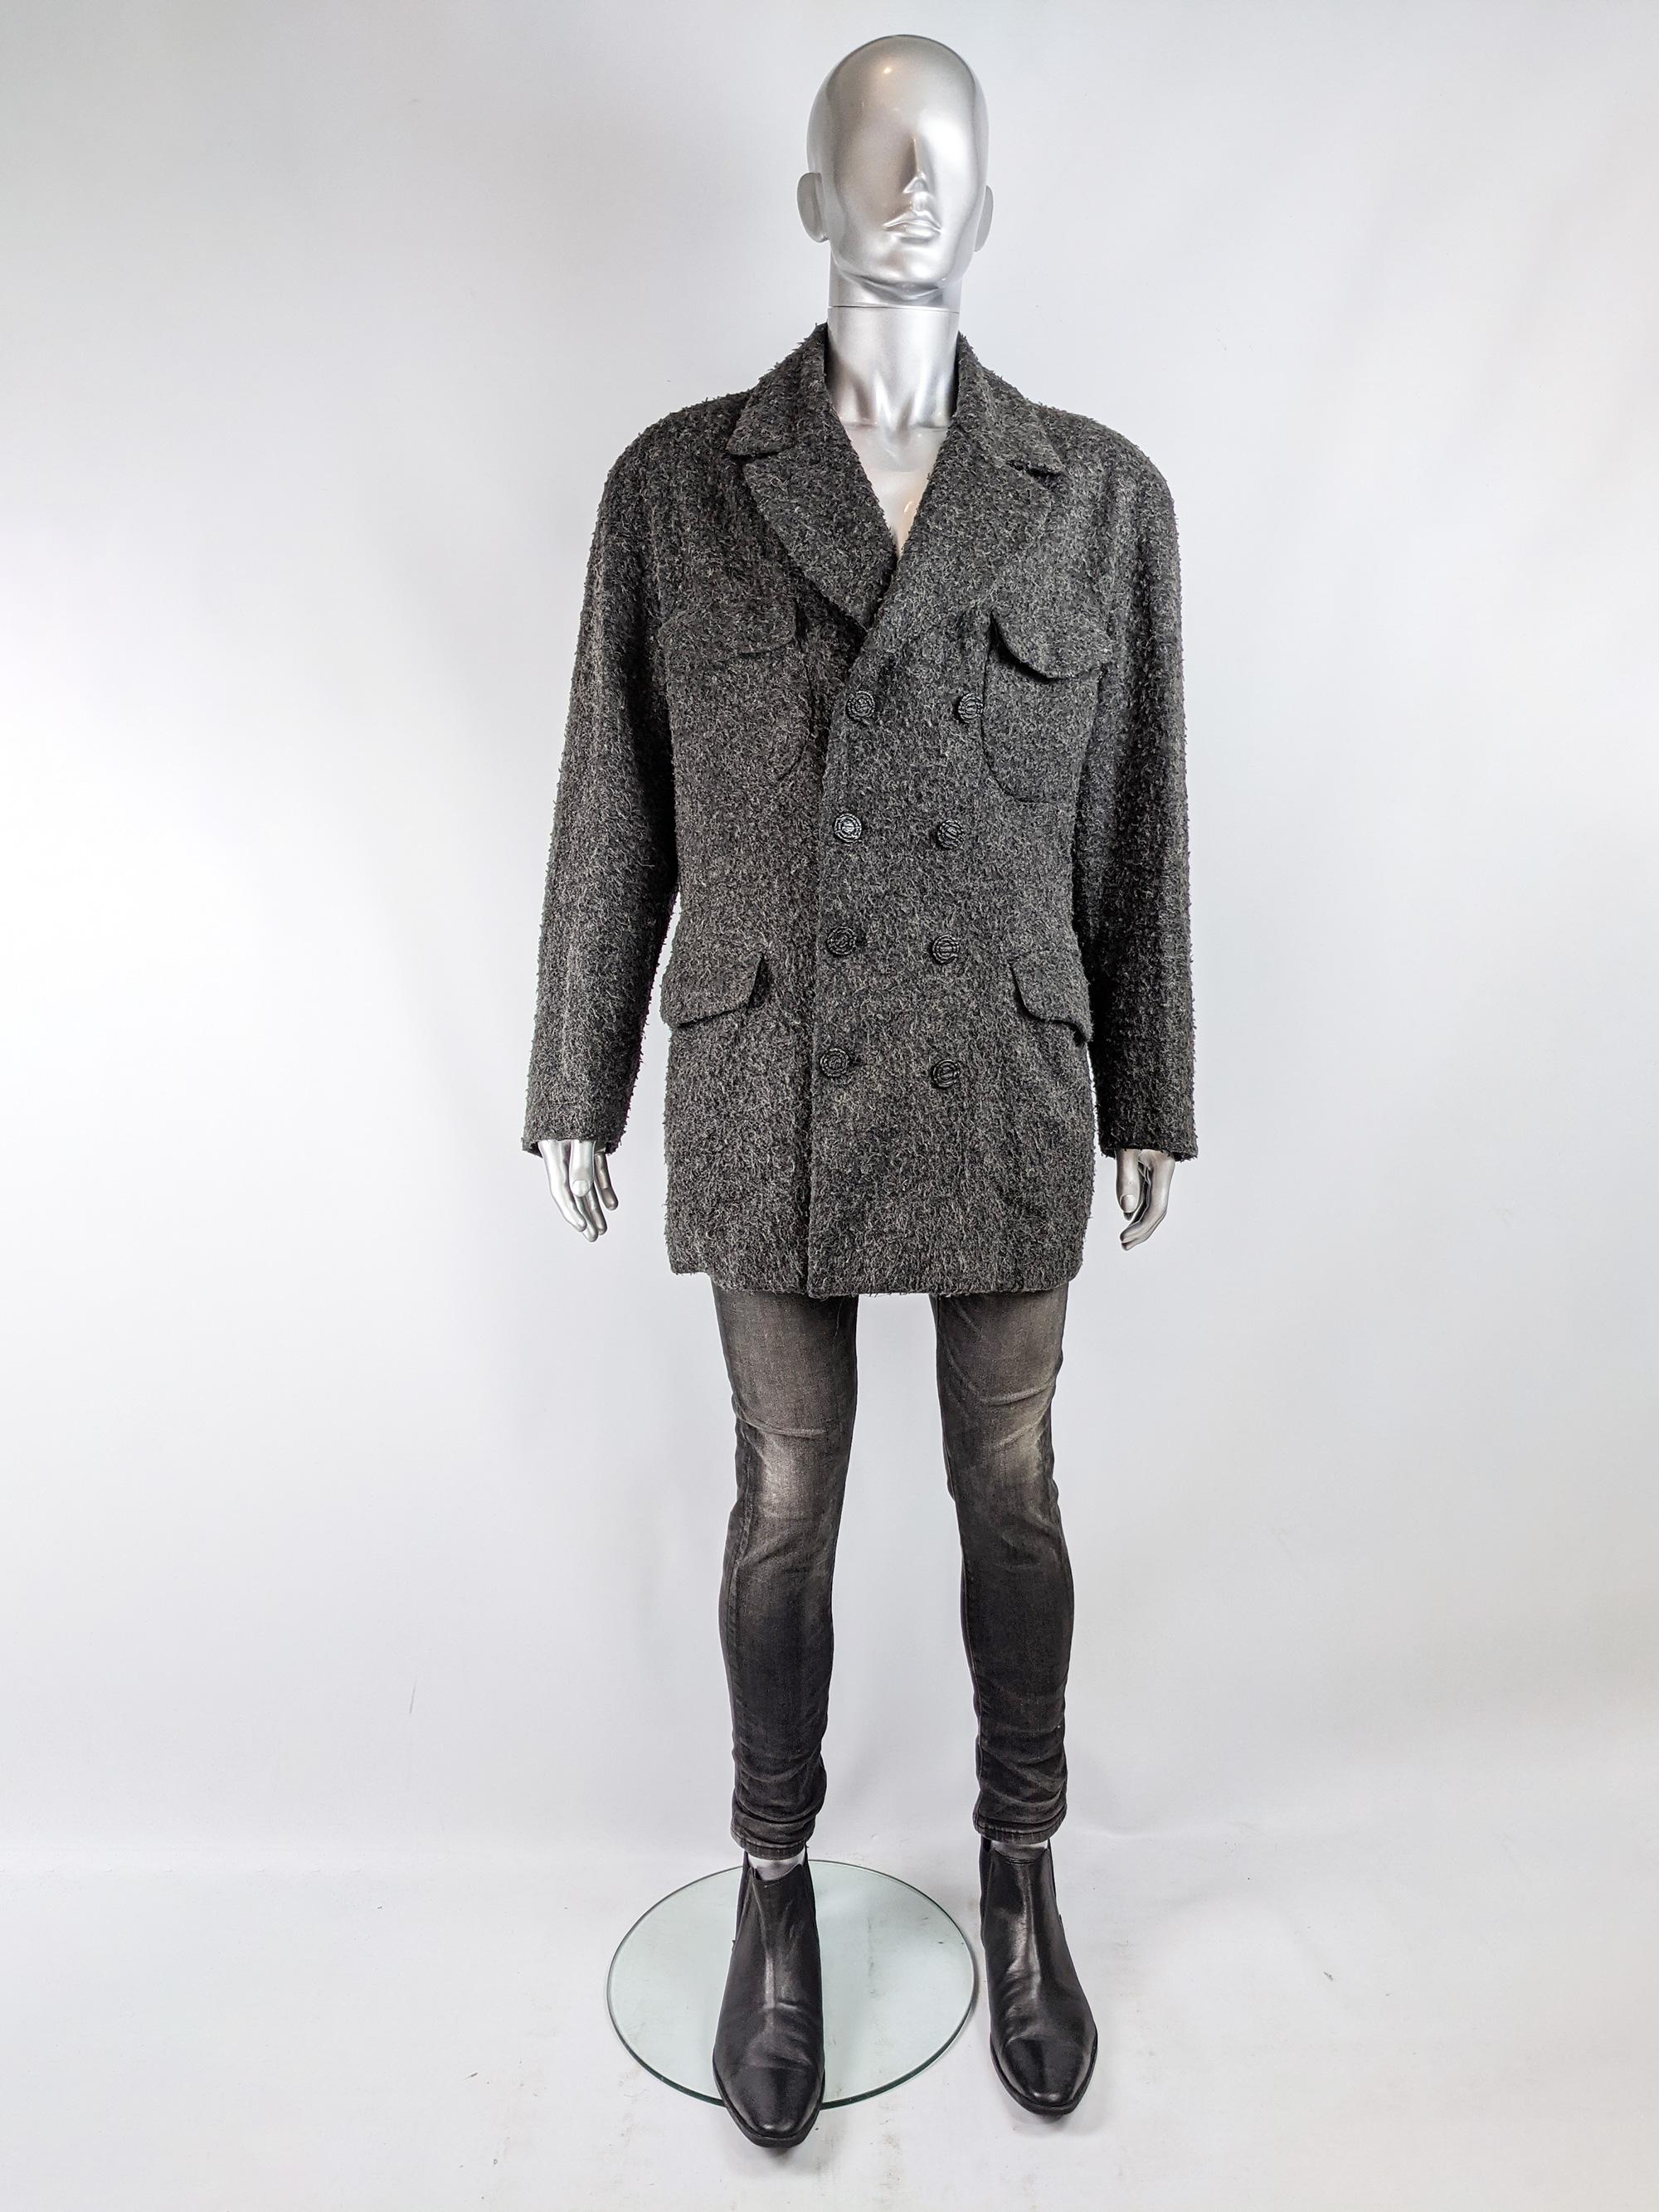 A stylish and rare Calugi e Giannelli jacket from the 80s in a fuzzy grey wool and mohair tweed with four patch pockets on the front and double breasted buttons. 

Size: Marked IT 52 which equates to an XL
Chest - 46” / 117cm (allow 2-4